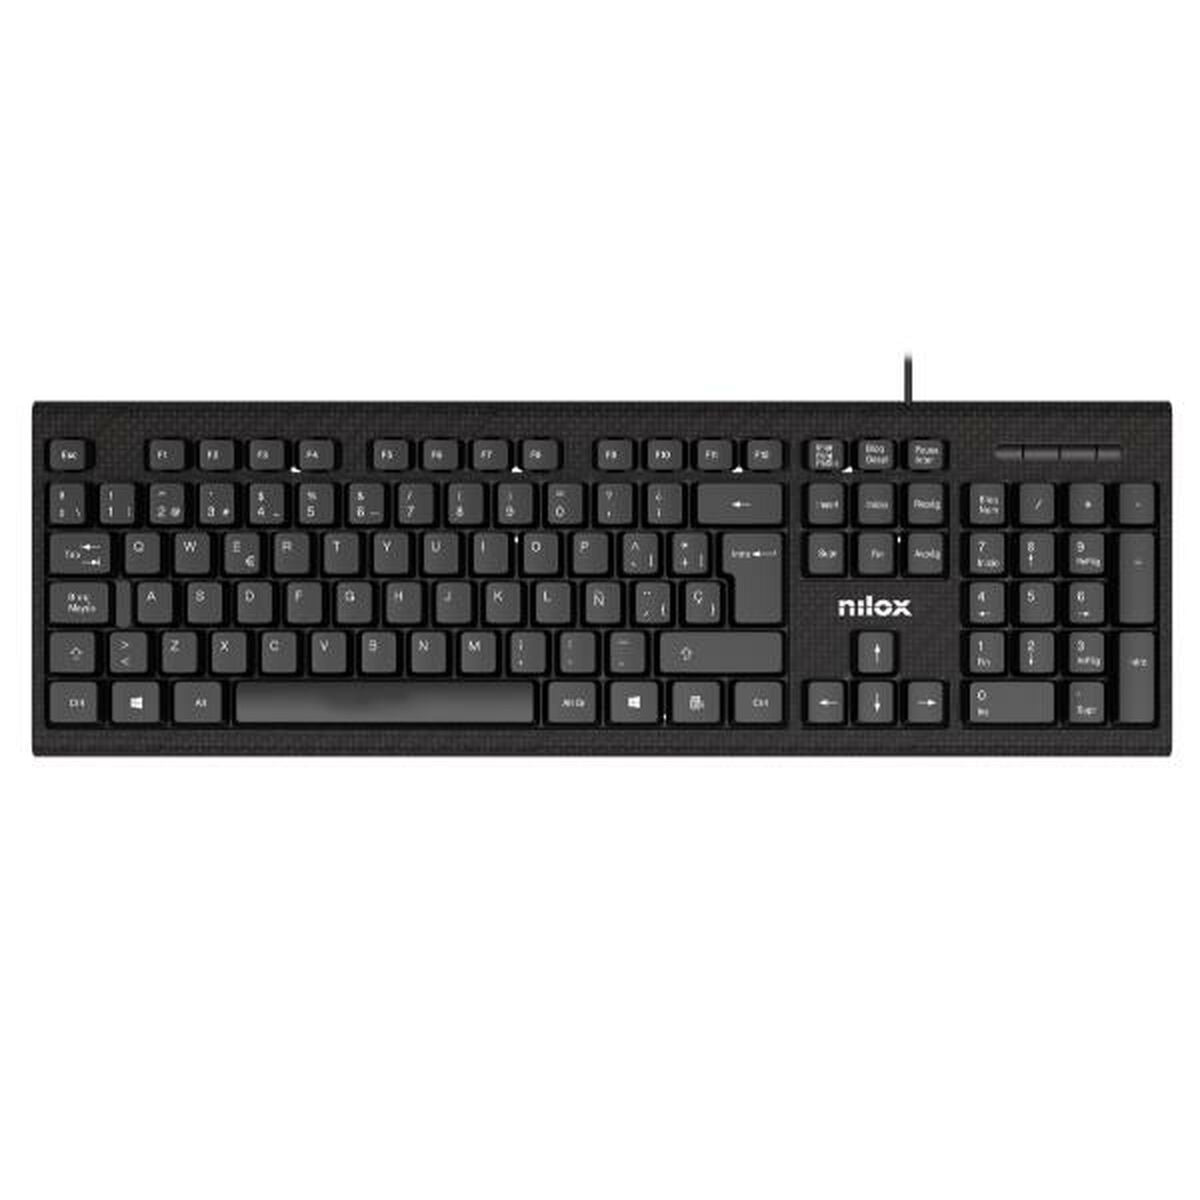 Keyboard Nilox NXKBE000011 Black Spanish Qwerty, Nilox, Computing, Accessories, keyboard-nilox-nxkbe000011-black-spanish-qwerty, :QWERTY, :Spanish, Brand_Nilox, category-reference-2609, category-reference-2642, category-reference-2646, category-reference-t-19685, category-reference-t-19908, category-reference-t-21353, category-reference-t-25628, computers / peripherals, Condition_NEW, office, Price_20 - 50, Teleworking, RiotNook